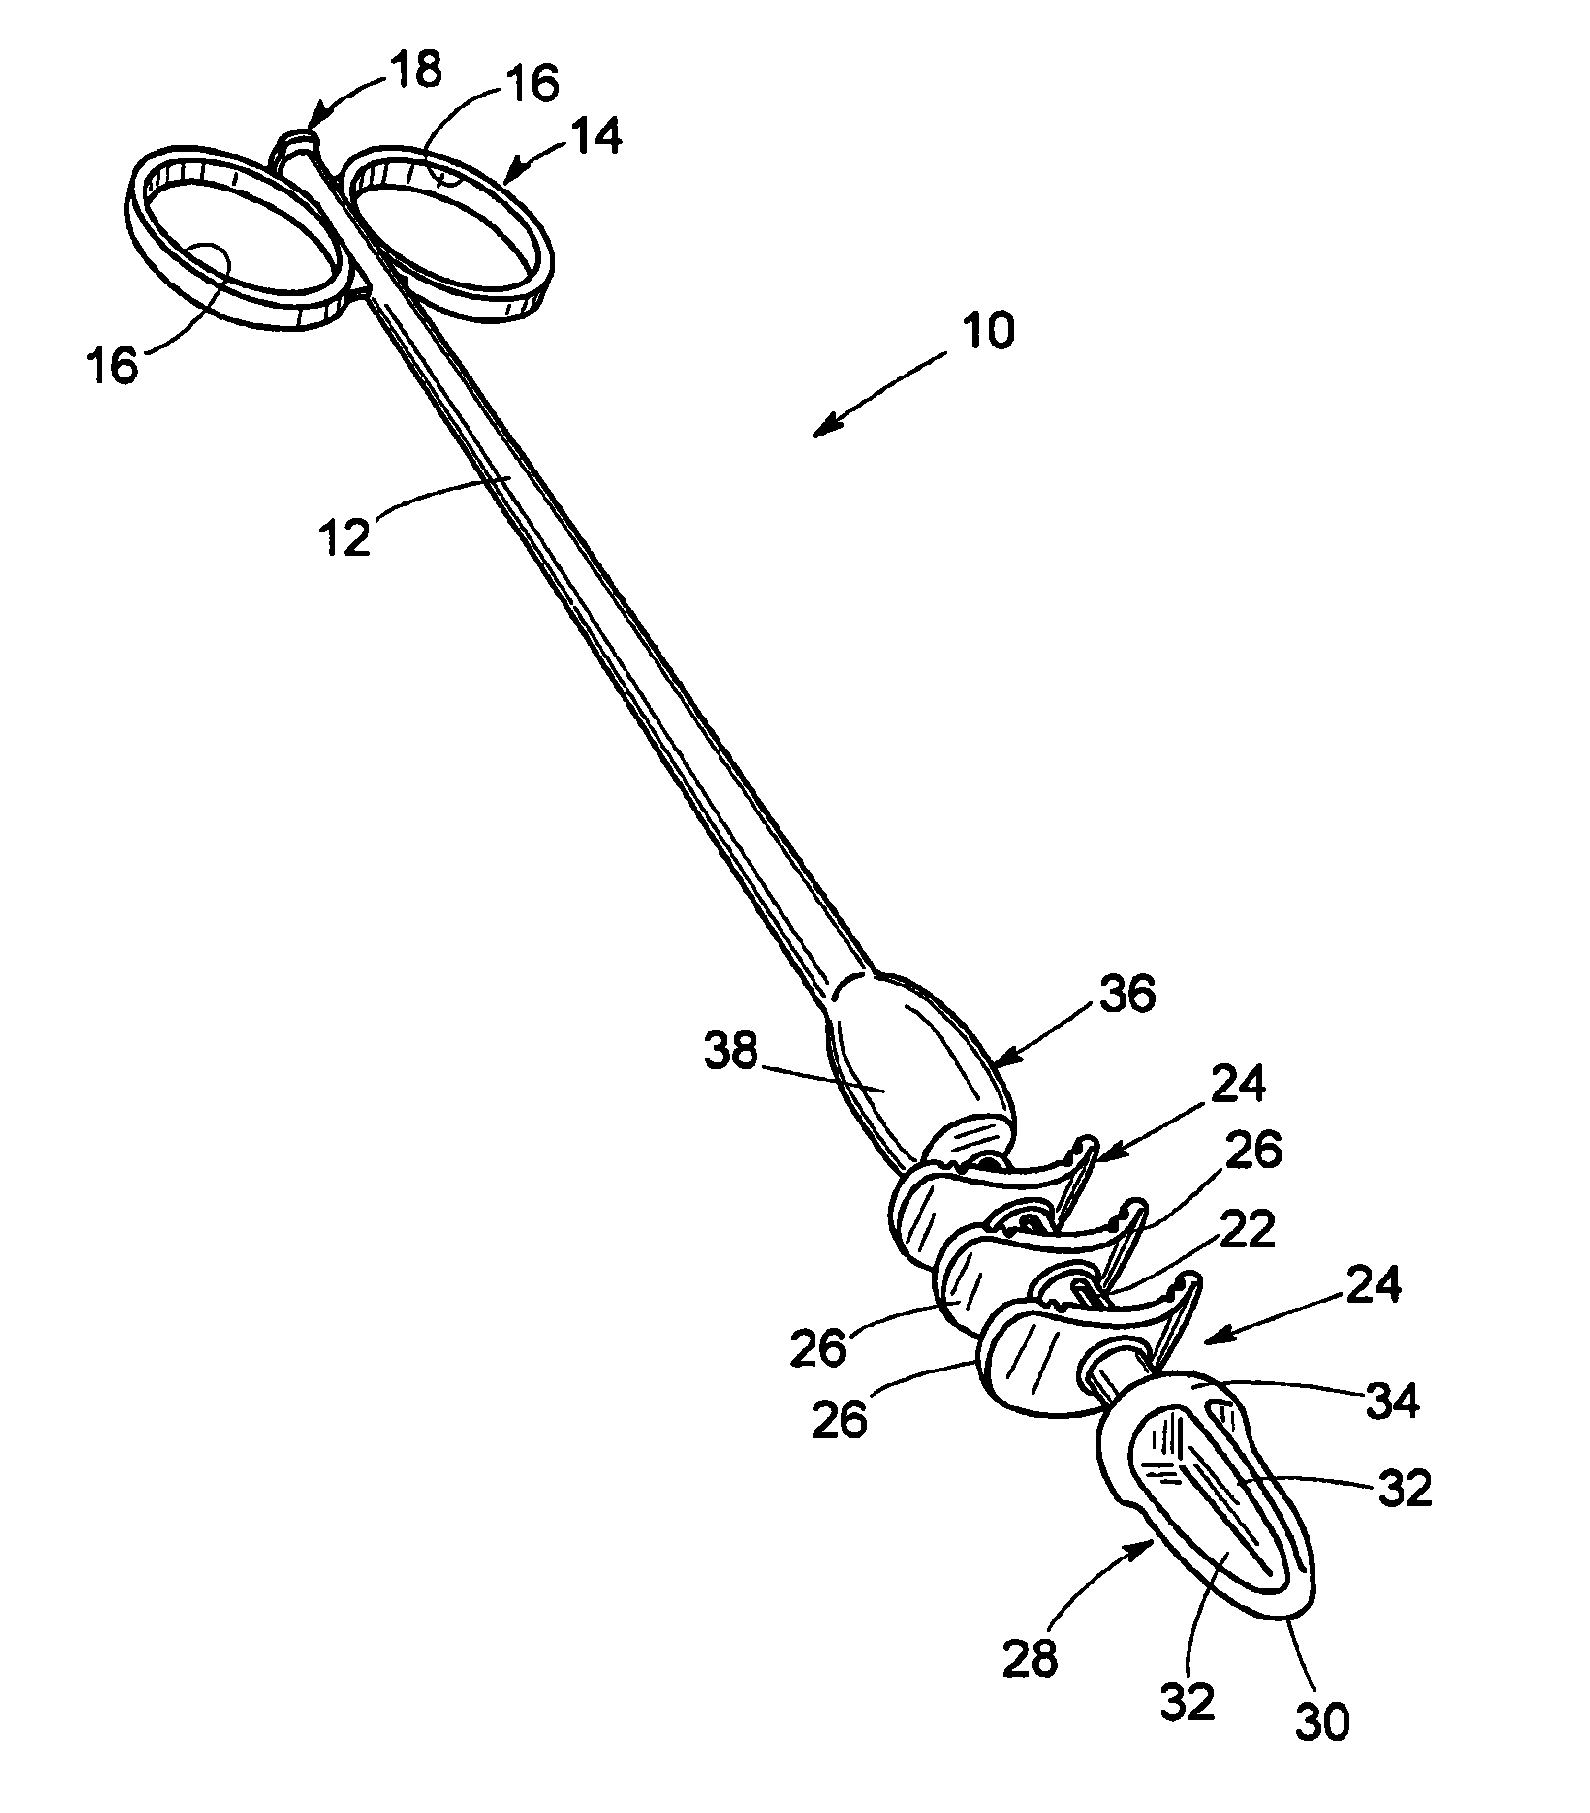 Fecal impaction removal tool